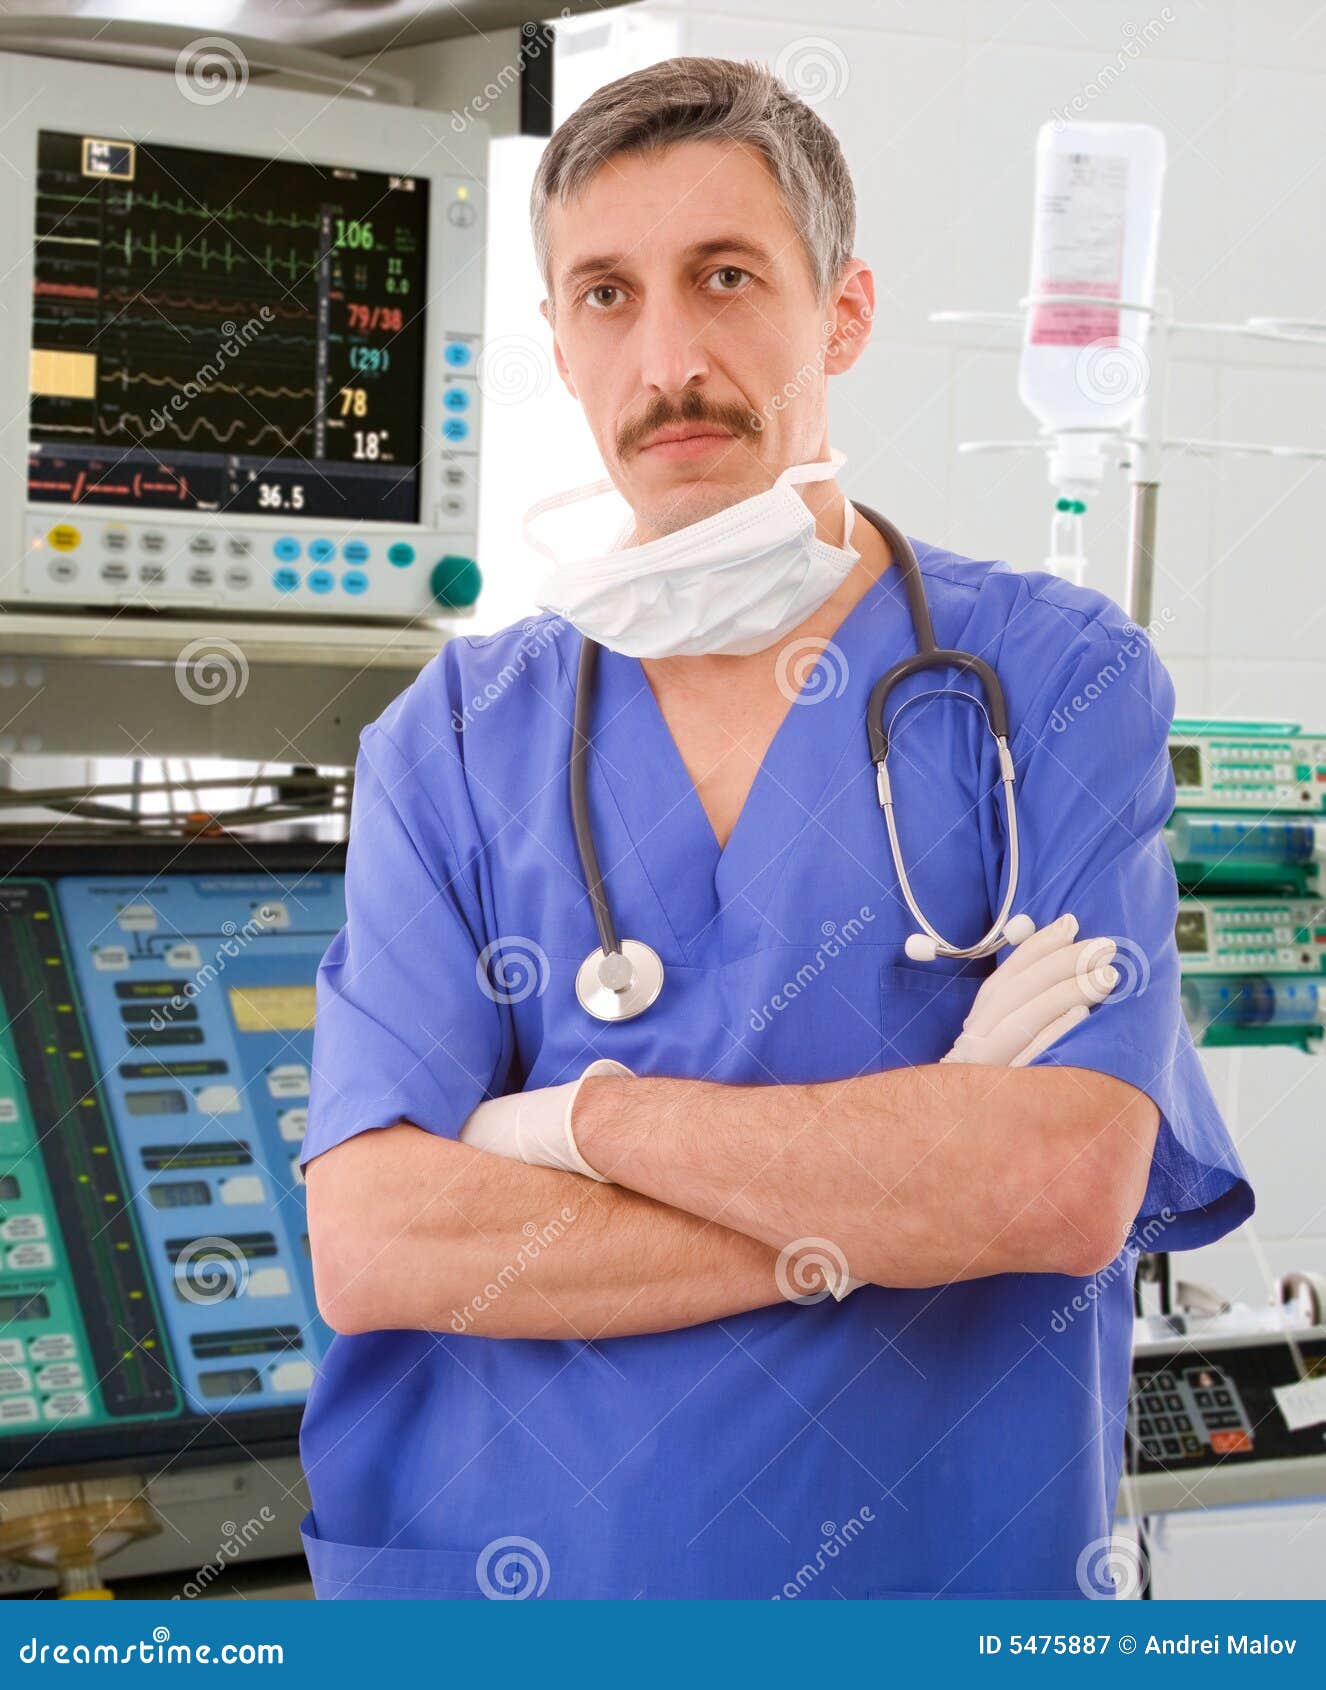 experienced physician in icu